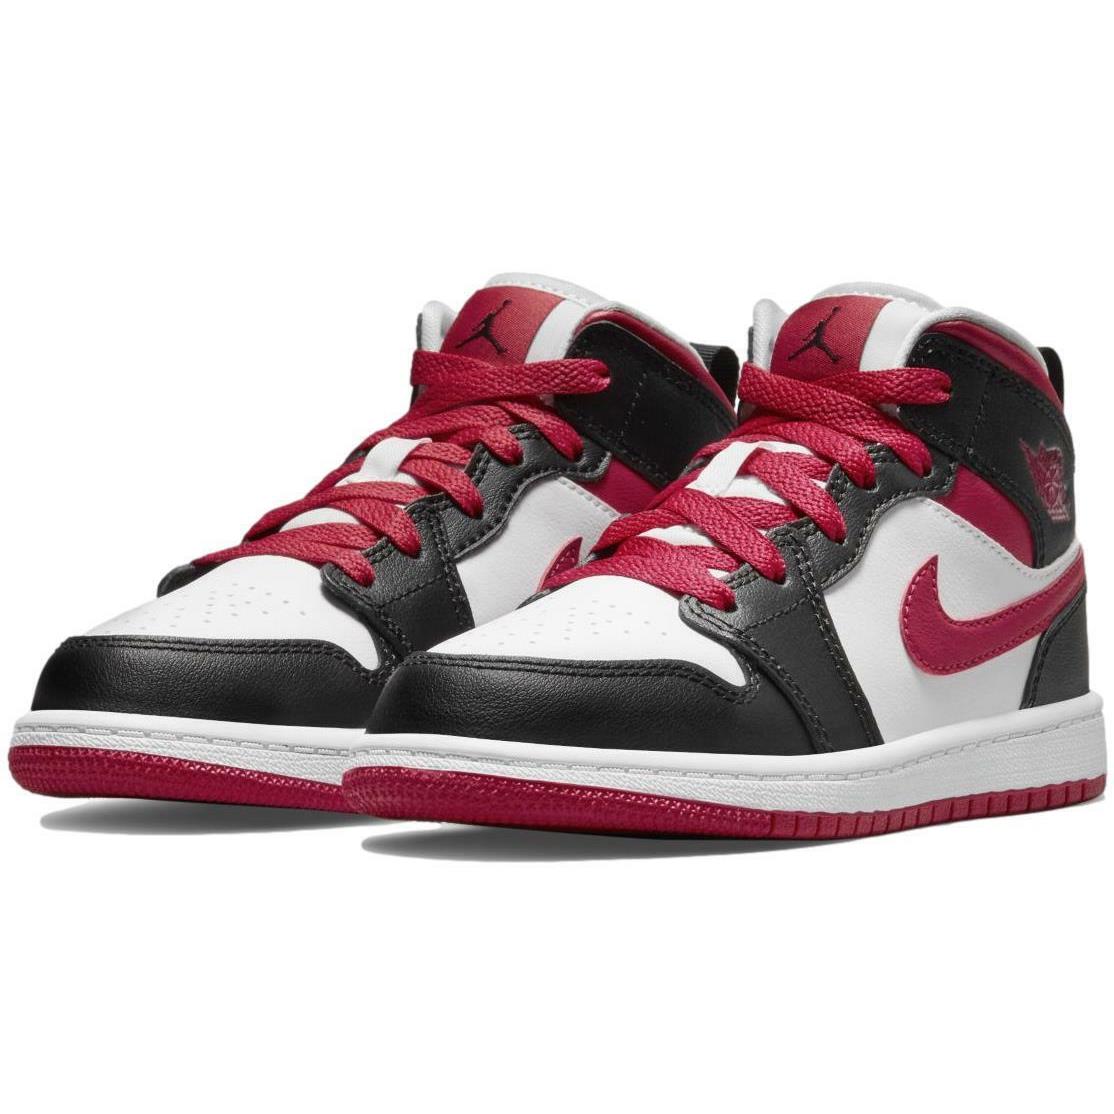 Nike Air Jordan 1 Mid PS `white Very Berry` Shoes Sneakers 640734-016